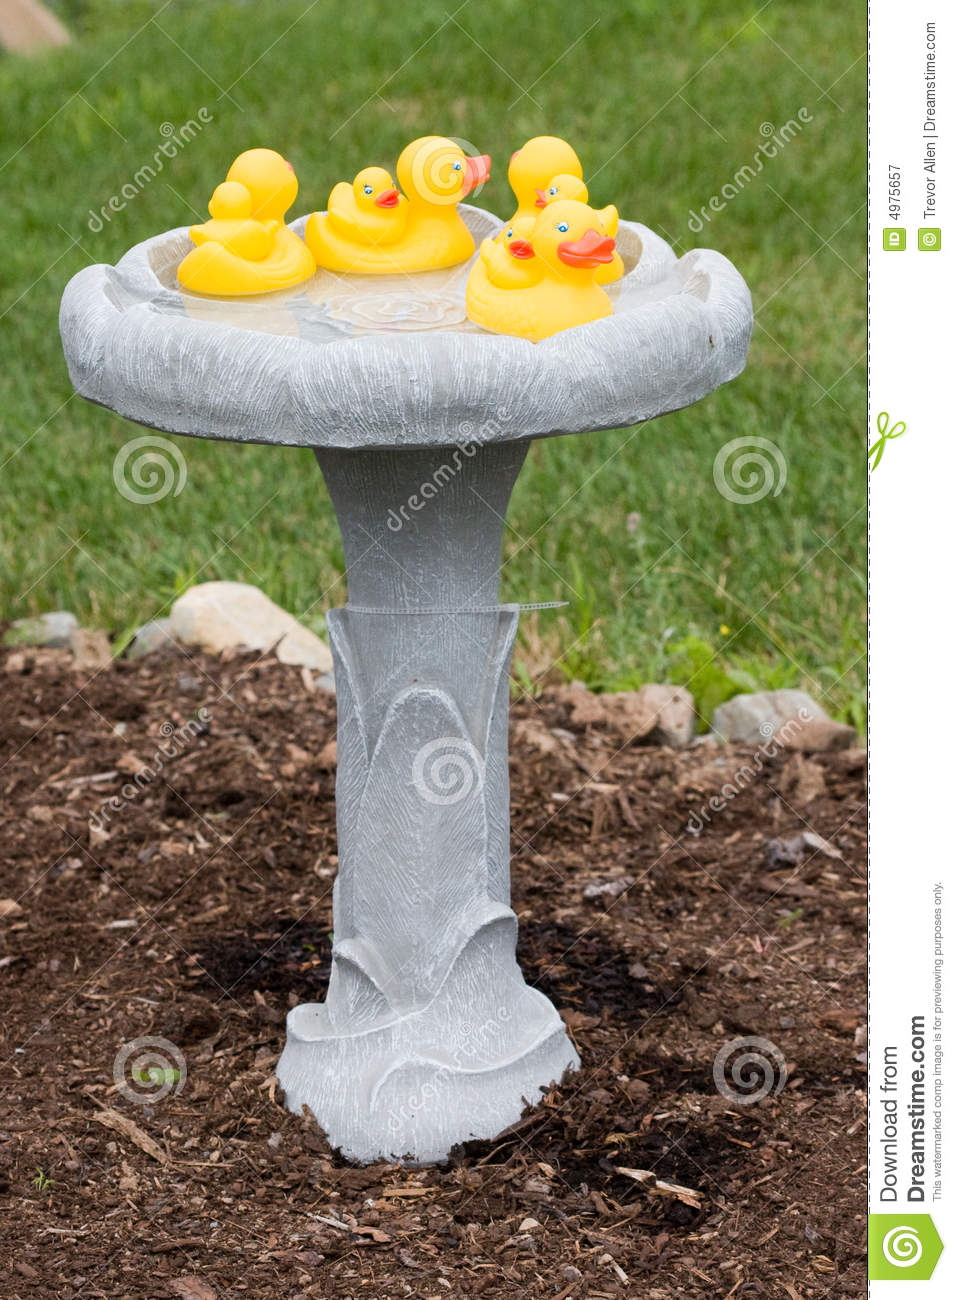 Rubber Duckies In A Bird Bath Royalty Free Stock Photography   Image    